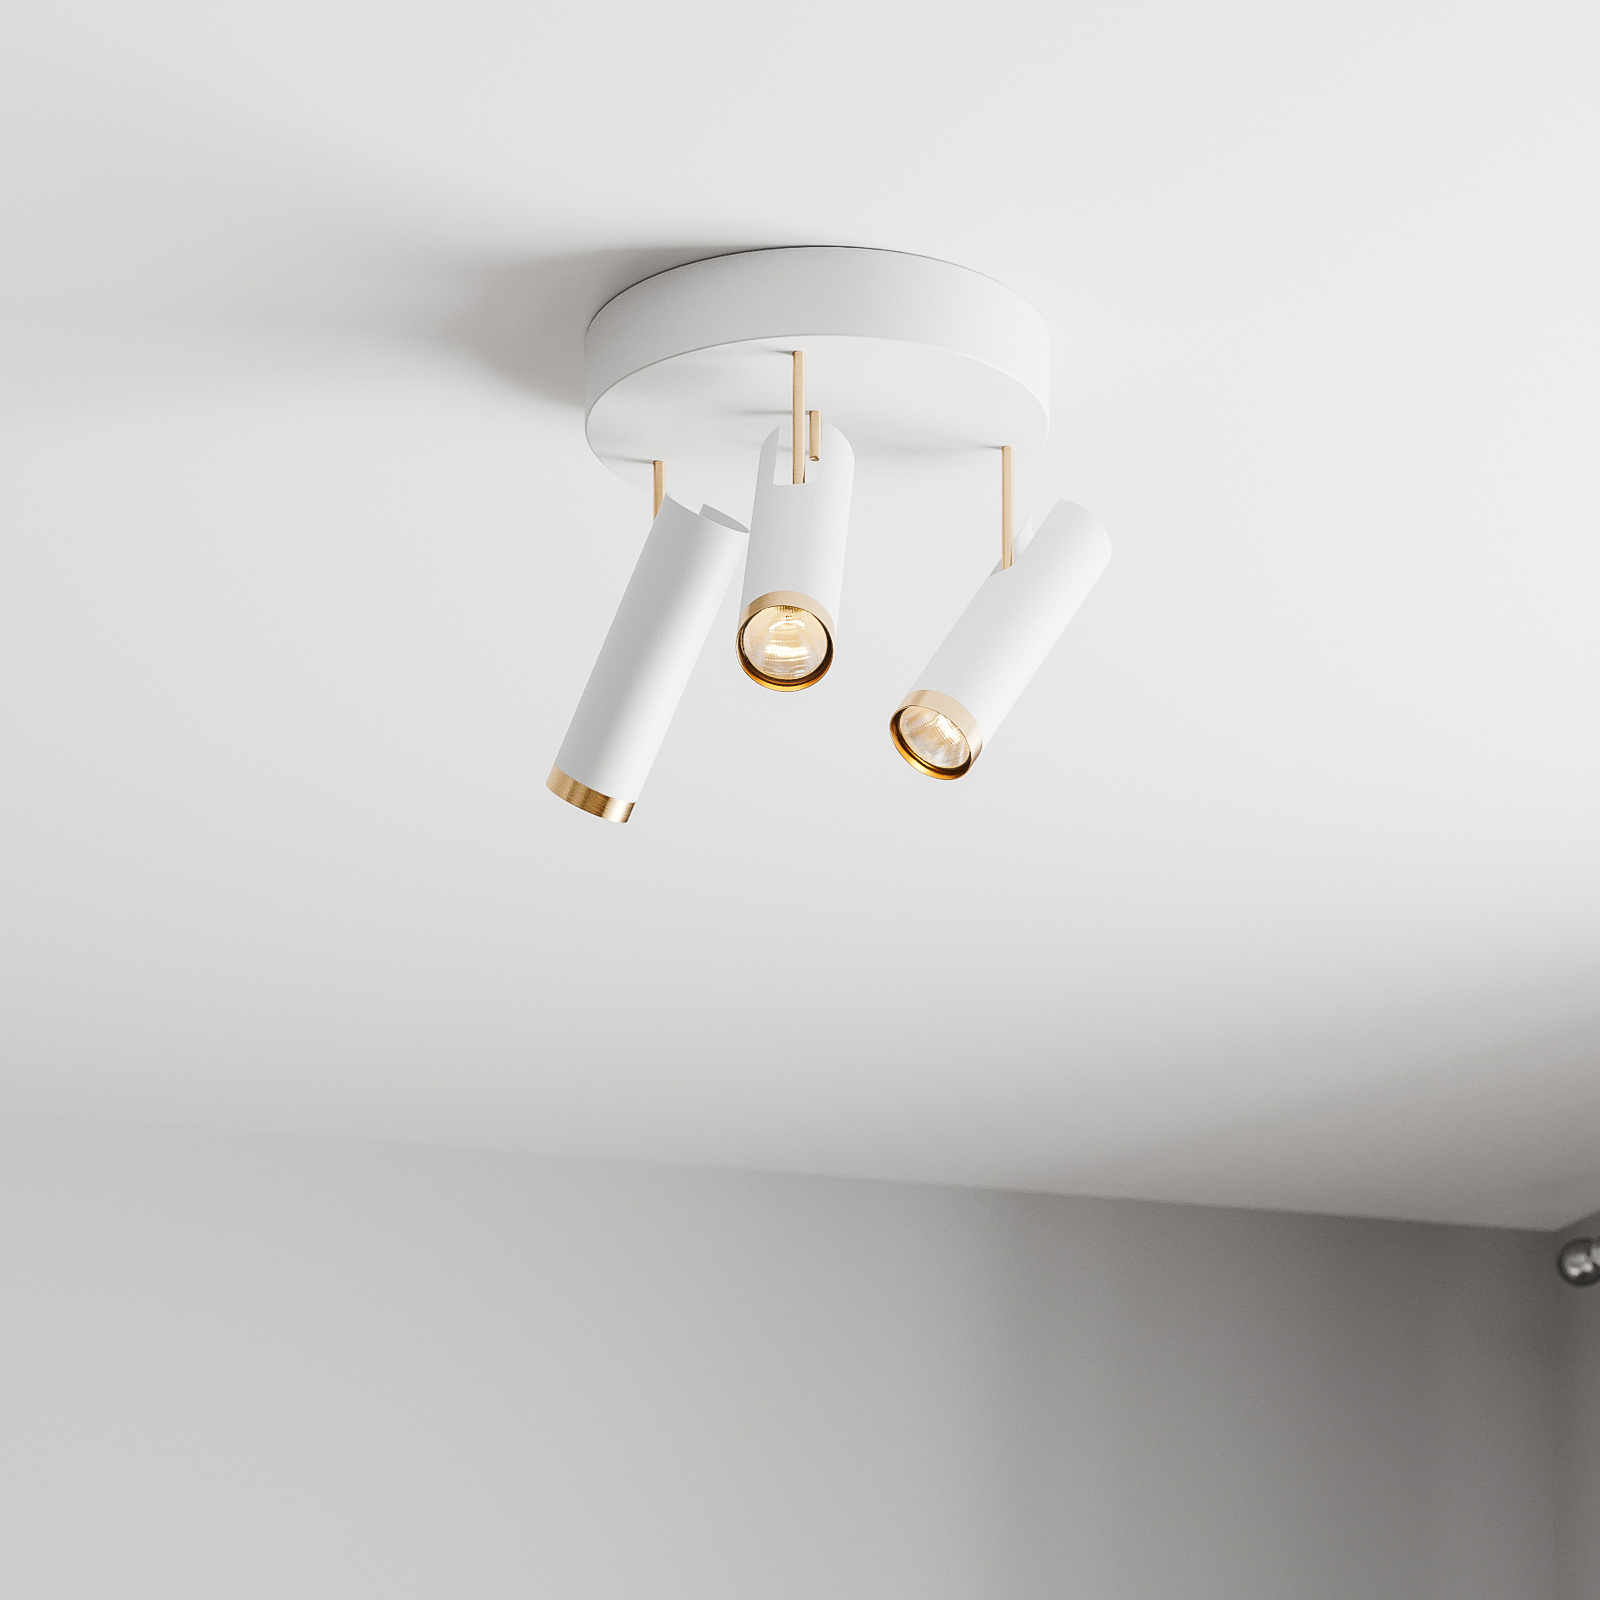 By Rydéns Puls downlight 3-bulb round